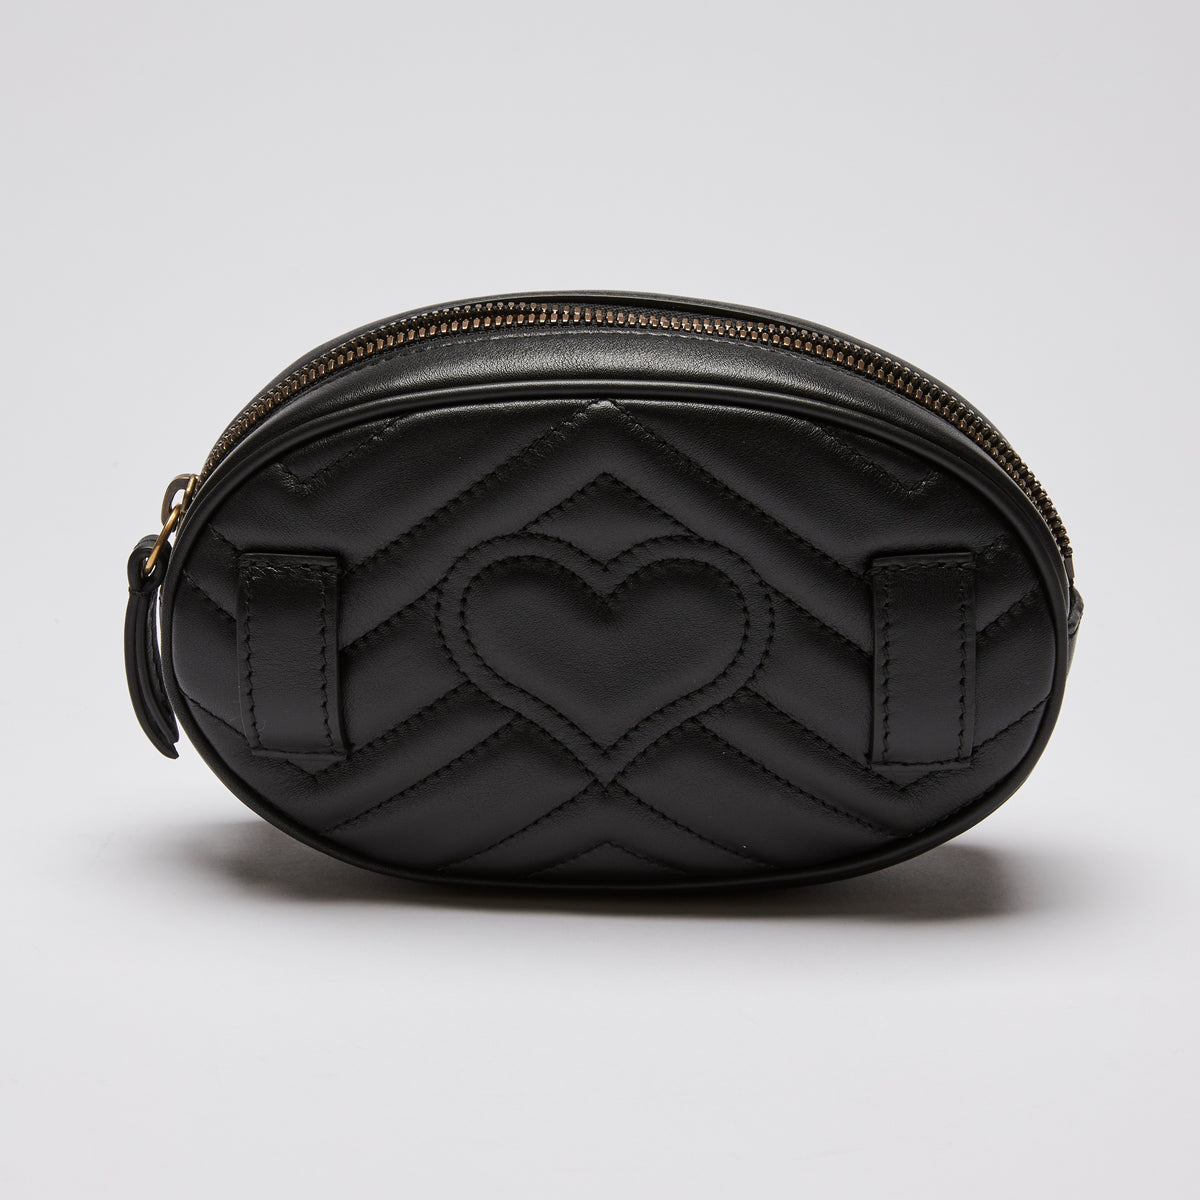 Excellent Pre-Loved Black Quilted Leather Oval Waist Pouch.(back)